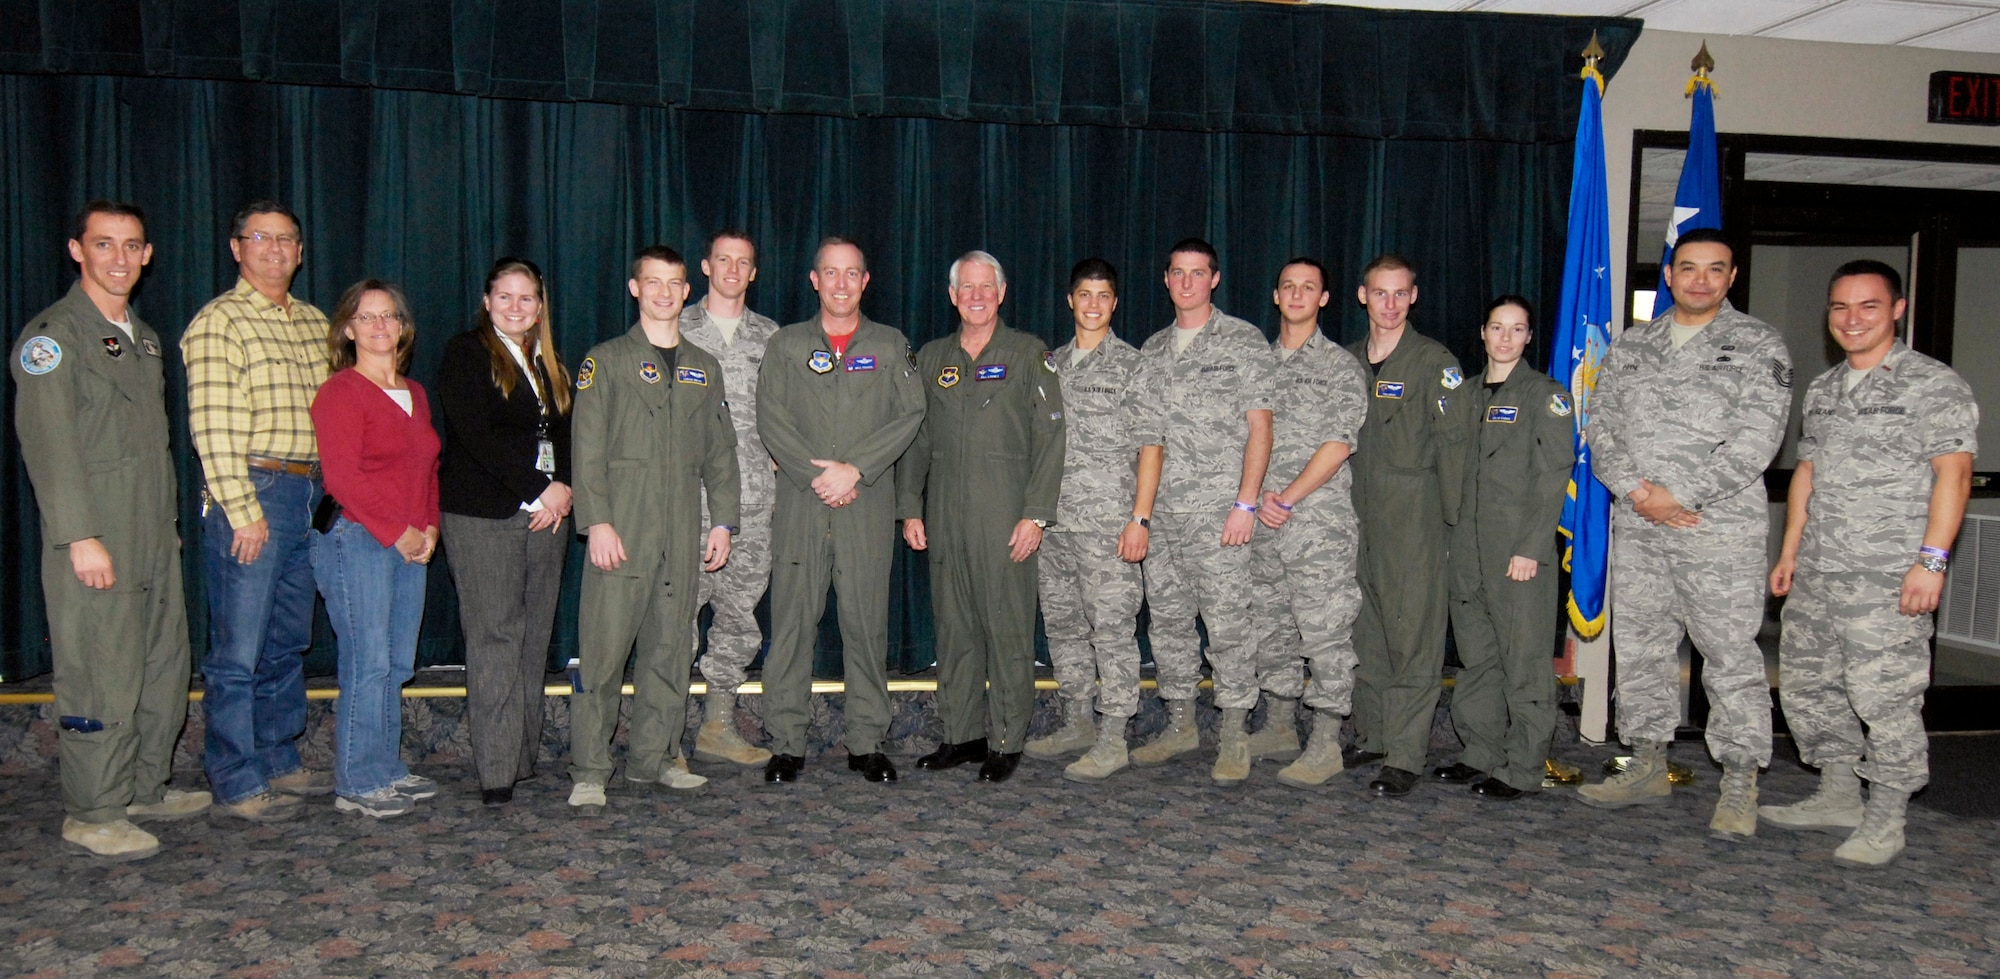 LAUGHLIN AIR FORCE BASE, Texas — Retired Gen. William Looney and Col. Michael Frankel, 47th Flying Training Wing commander pose with Club XL’s bar renovation team. The team includes Lt. Col. William Rhyne, 2nd Lts. Daniel Martin, Zachary Bierhaus, David Dailey, Lucian Dekich, Daniel Huber, Derek Van De Wege and Frank Von Heiland, all of the 47th Operations Support Squadron. Other members represent the 47th Civil Engineering Squadron: Tech. Sgt. Stephen Payne, Glenn Purvis, Amy Morgan and Stephanie Marquez.  (U.S. Air Force photo by Jose Mendoza)